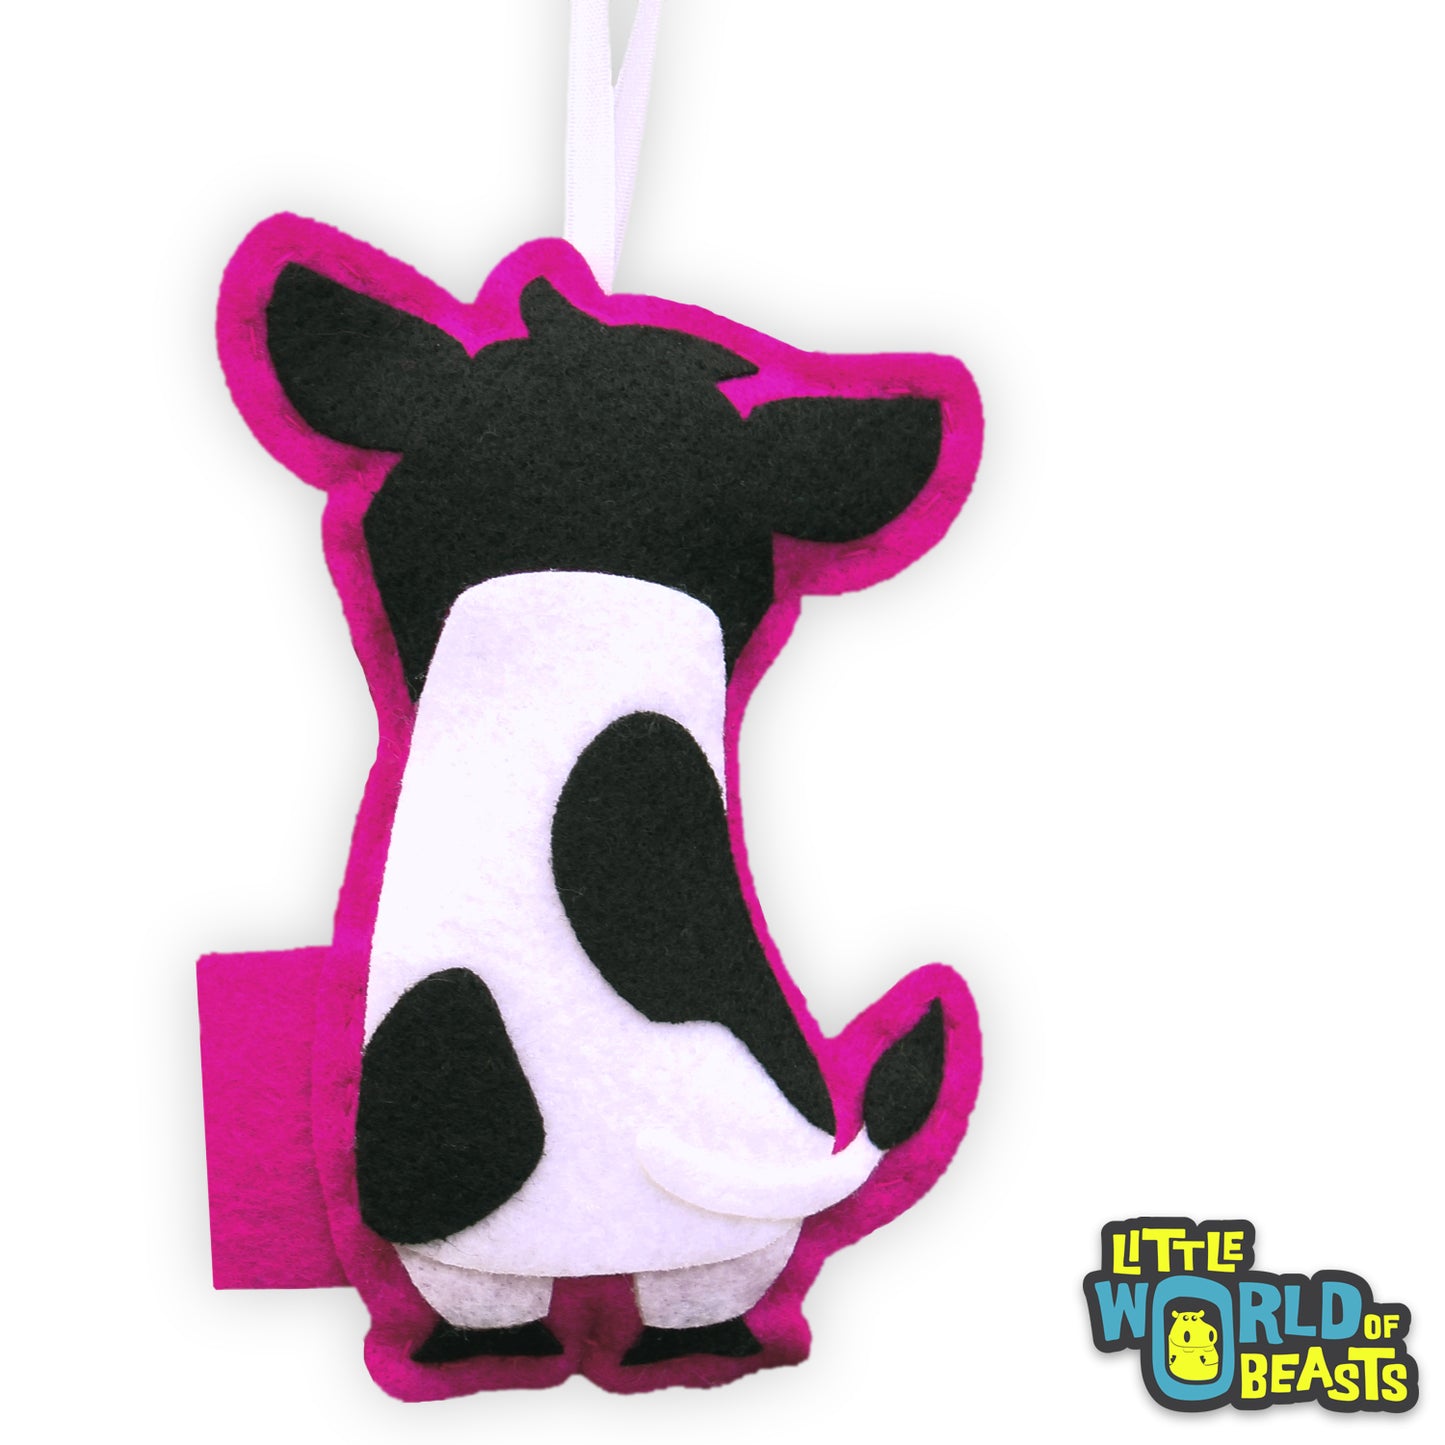  Cow Christmas Ornament - Little World of Beasts